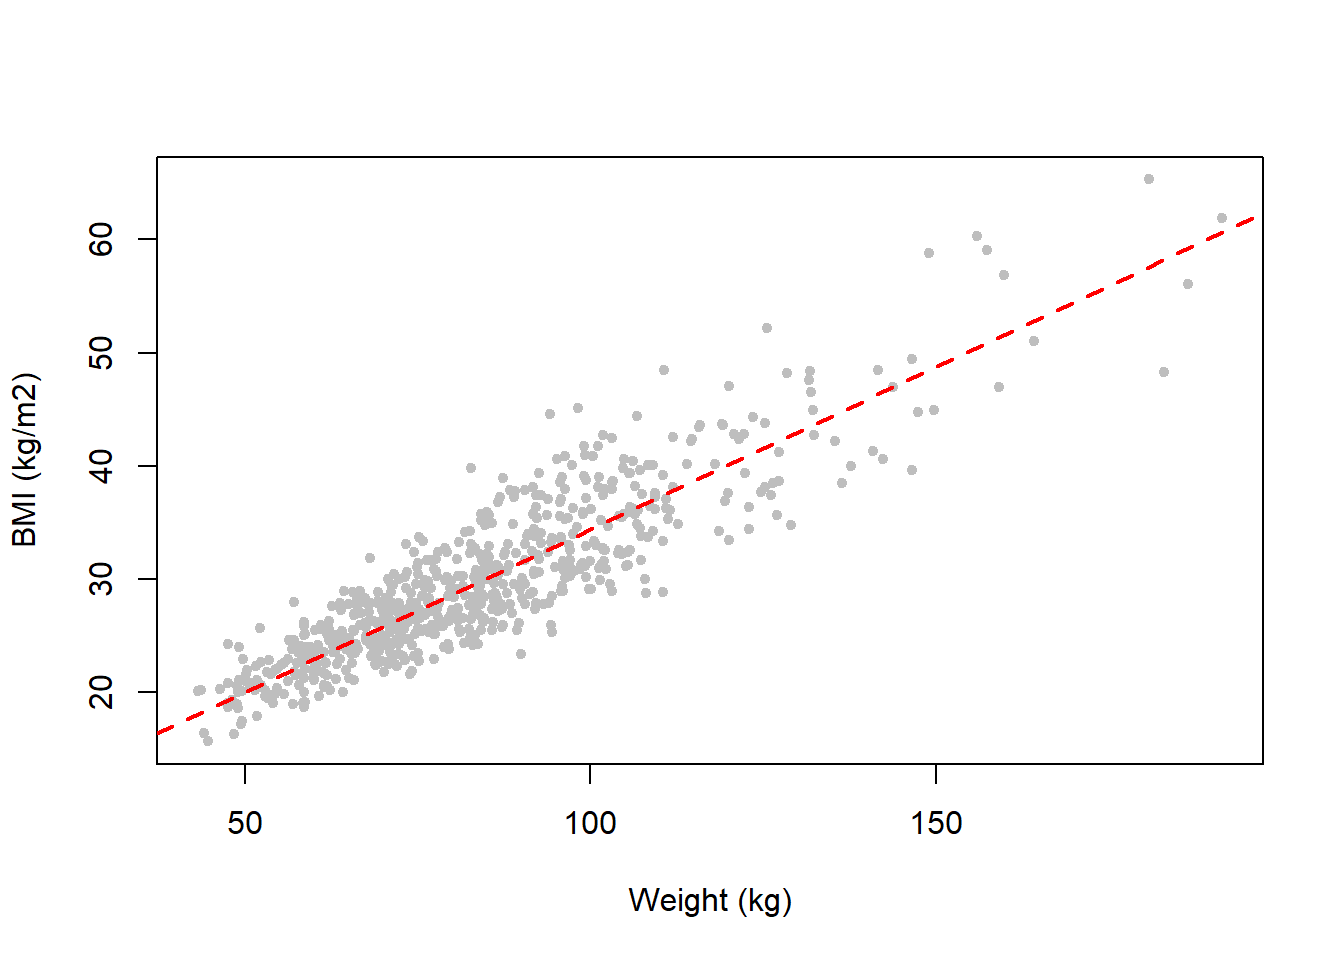 Body mass index and weight are highly collinear